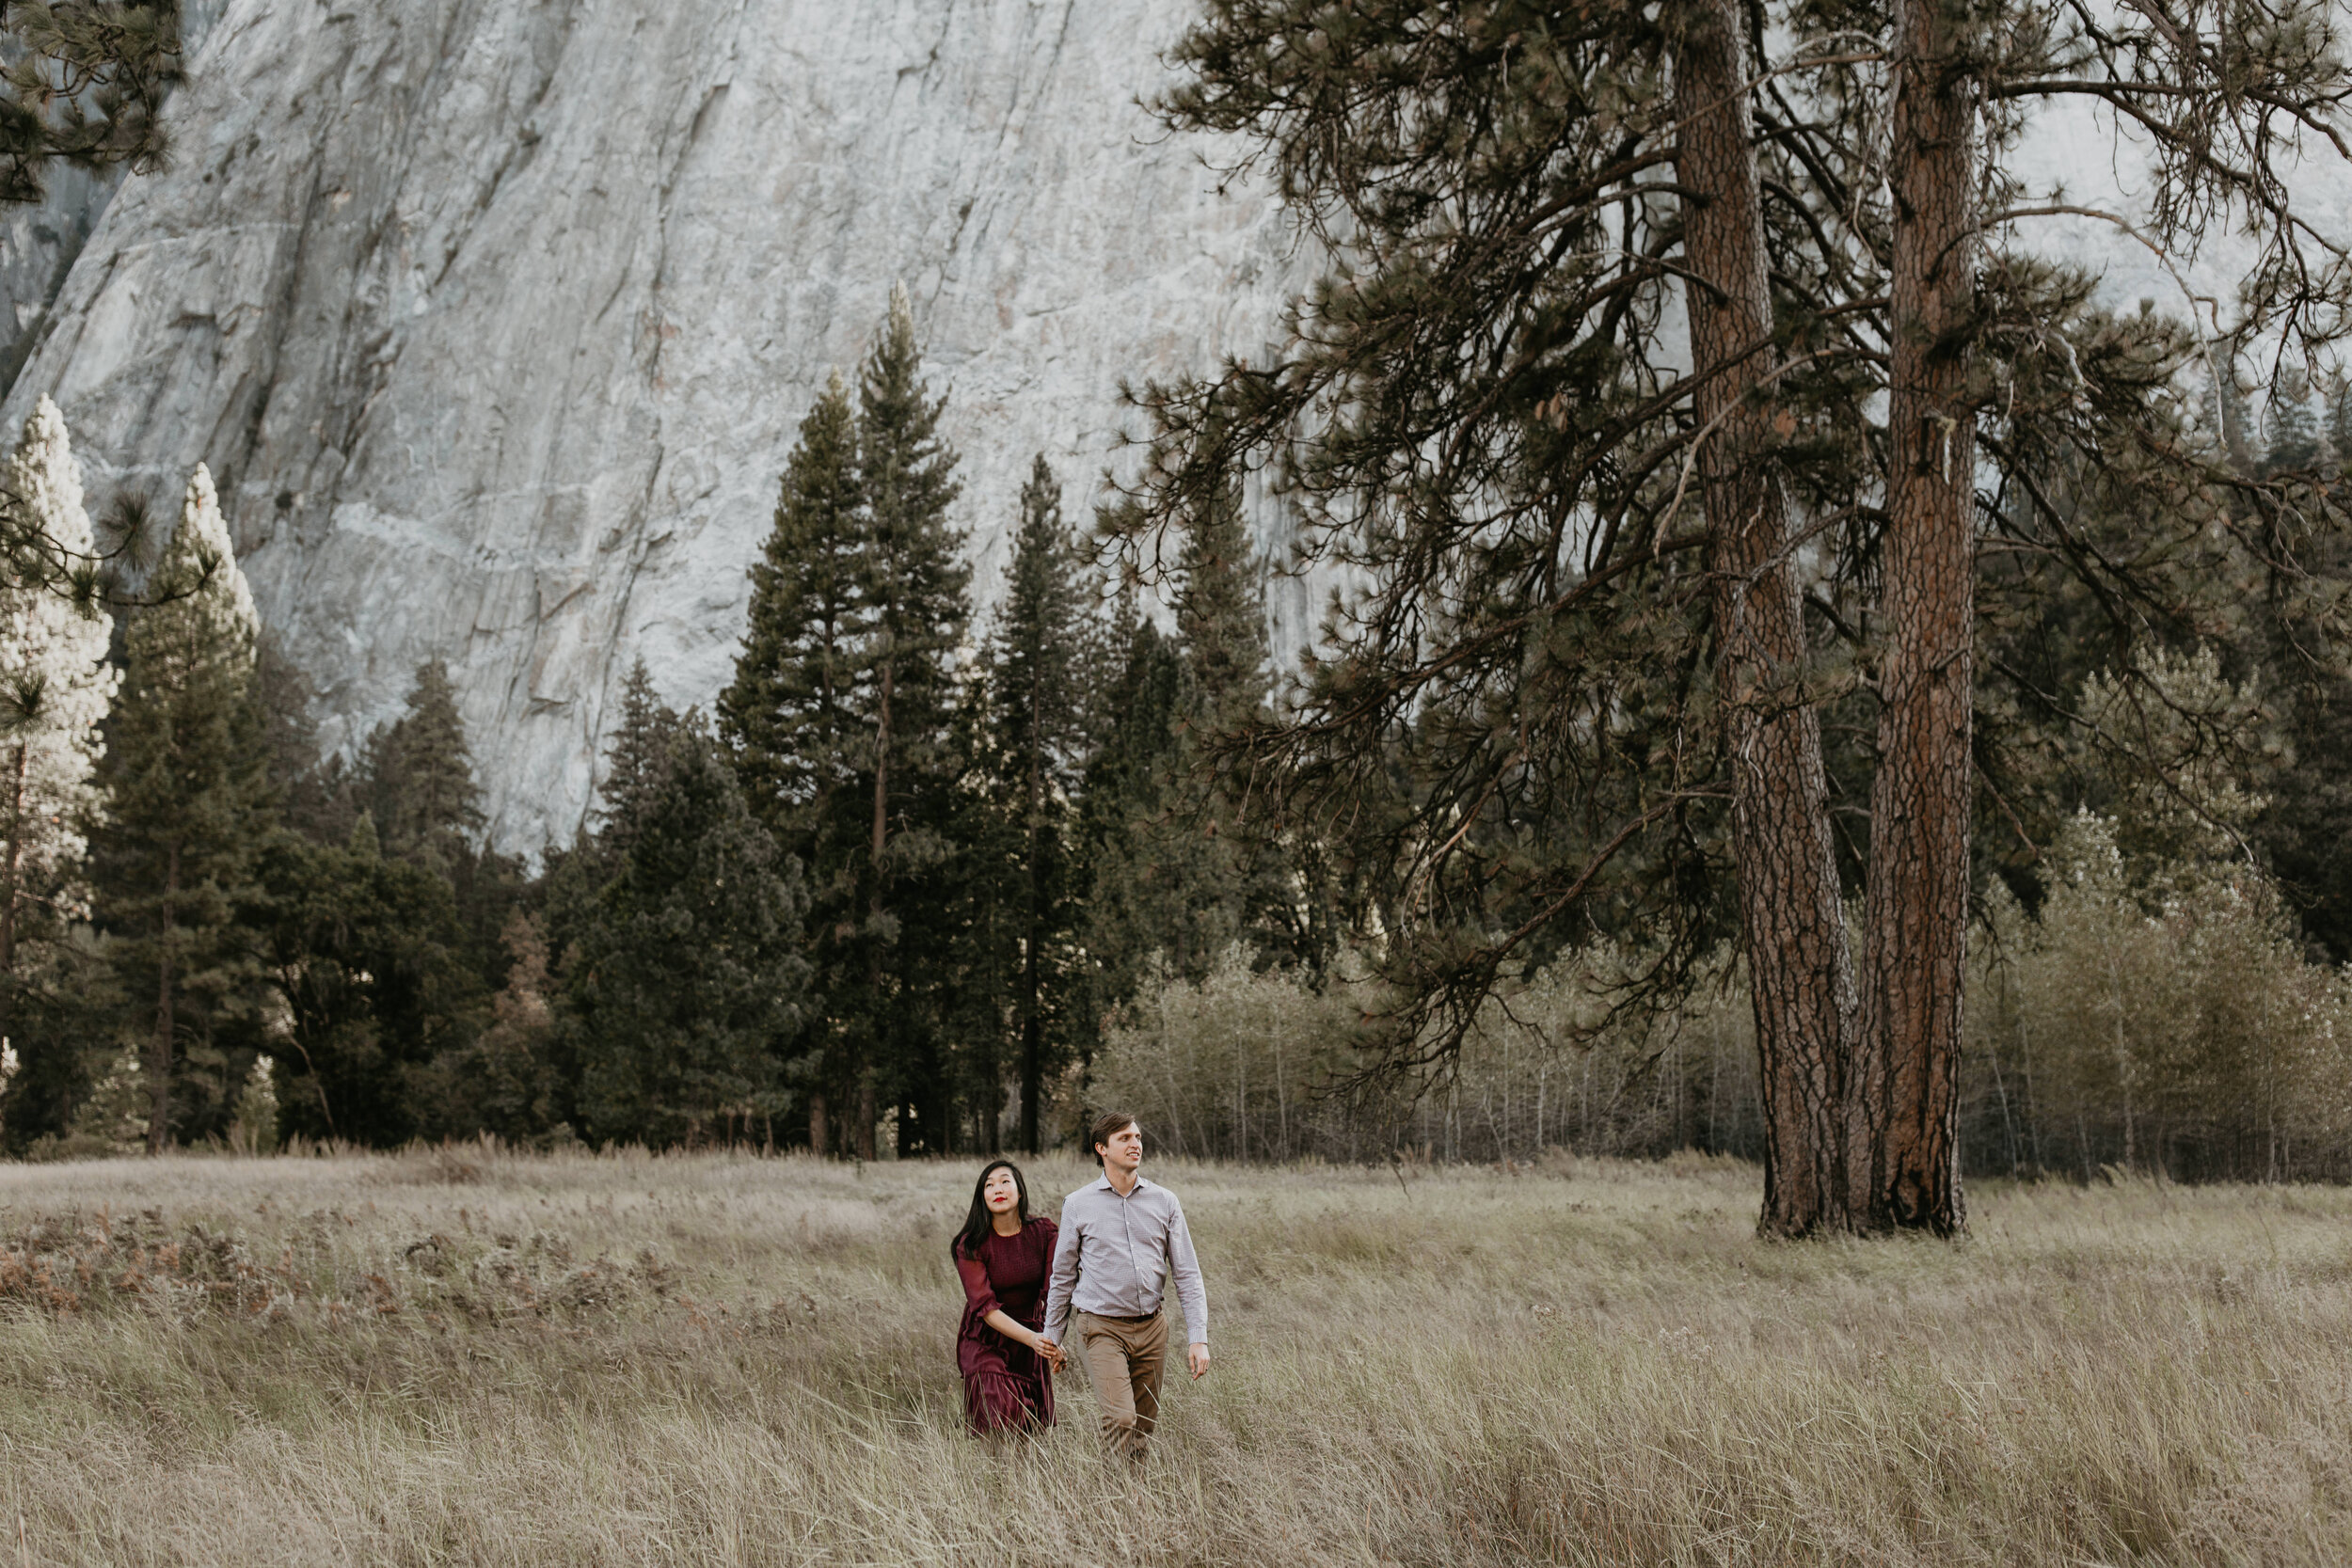 yosemite-national-park-couples-session-at-taft-point-and-yosemite-valley-yosemite-elopement-photographer-nicole-daacke-photography-104.jpg